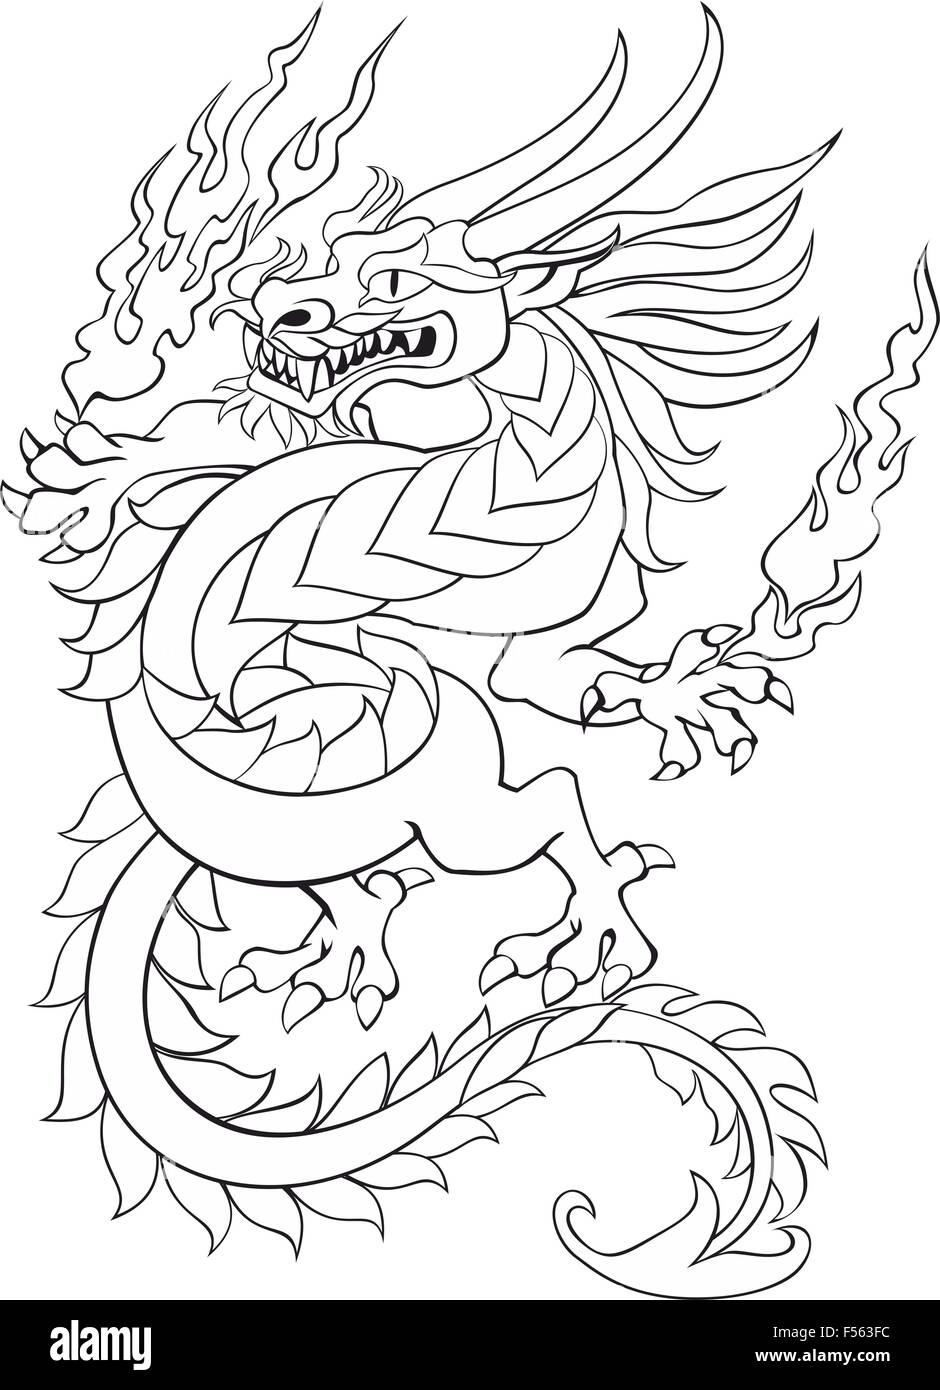 Dancing tribal dragon with flame in hands tattoo vector illustration Stock Vector